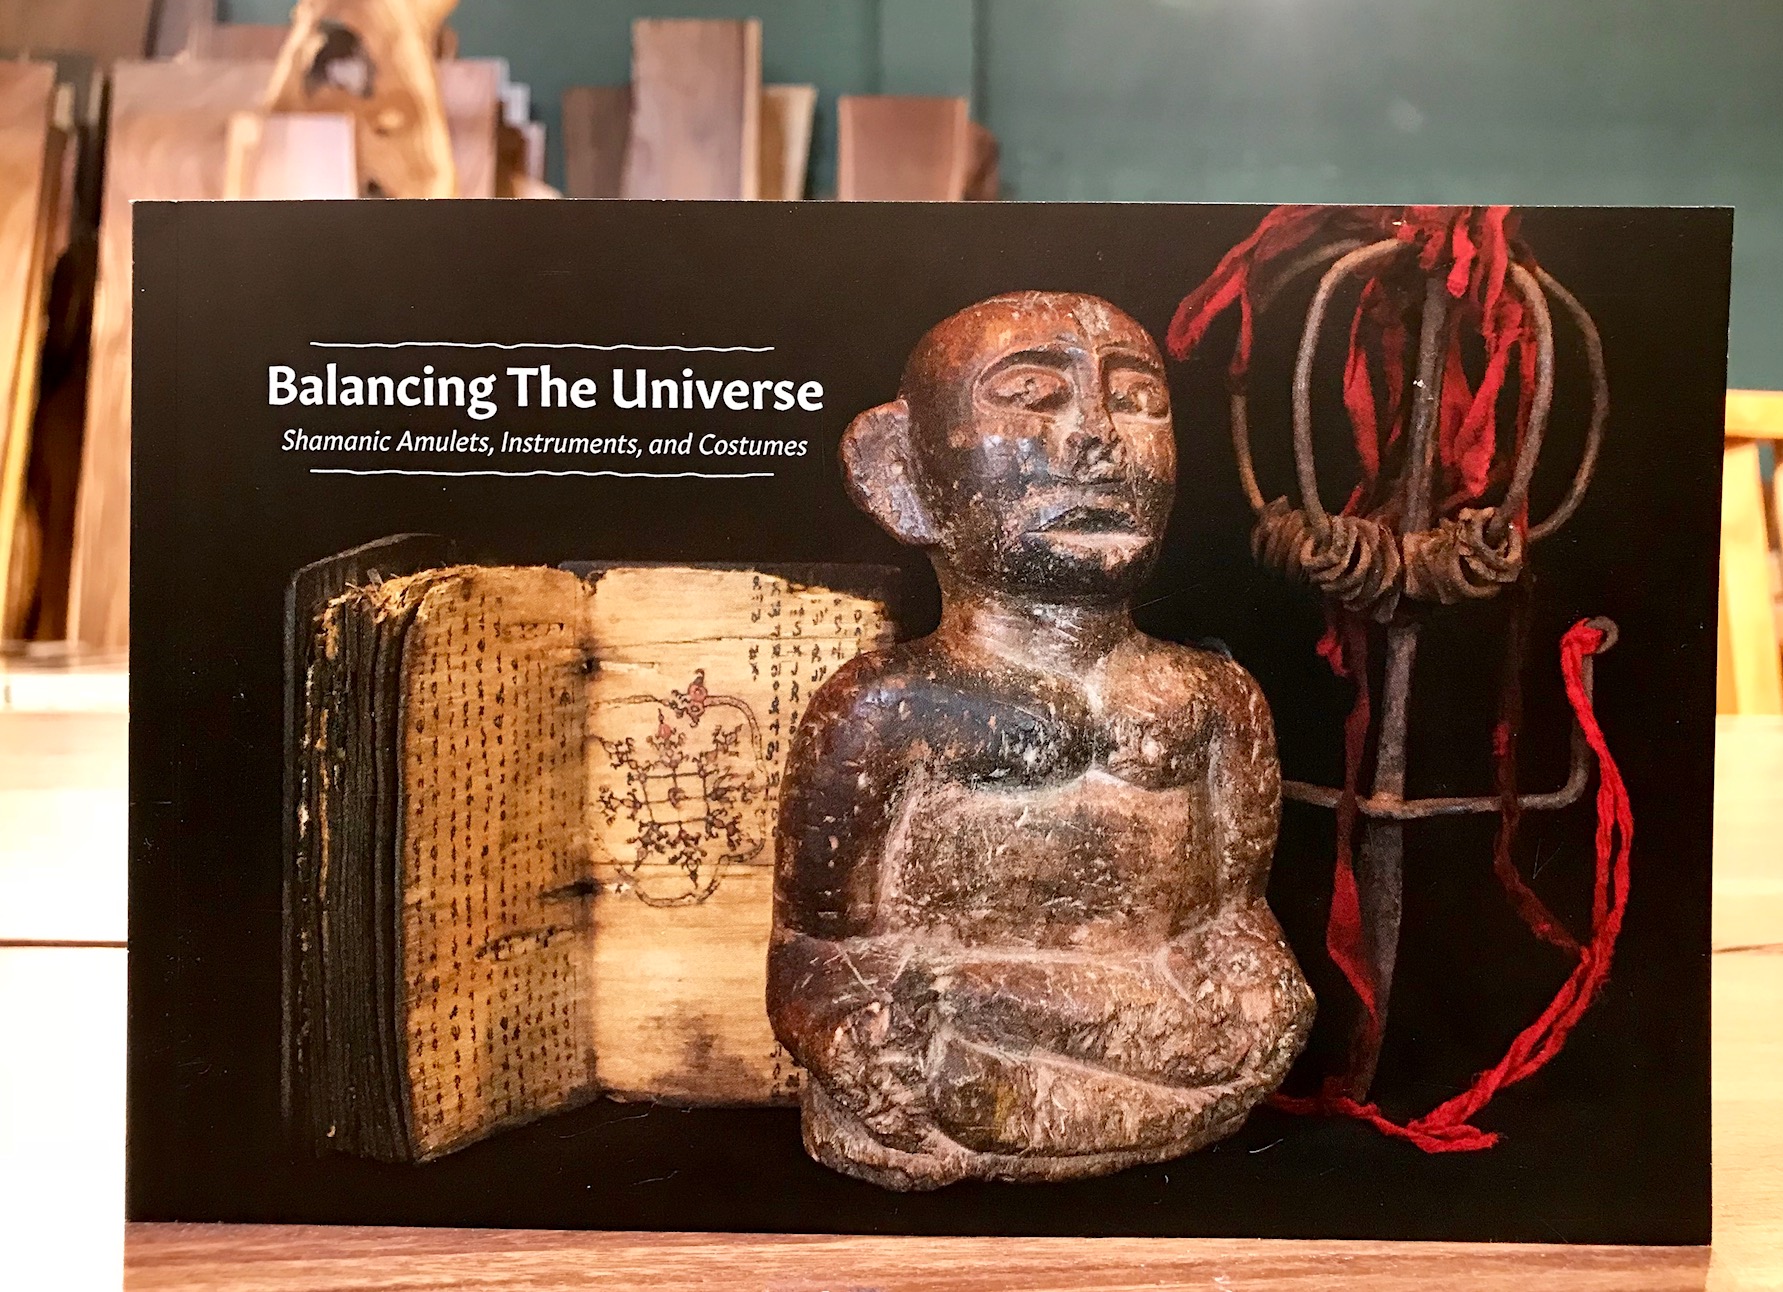 The catalog includes a dedication and personal forward from the collector, David Bardwick, of the David Alan Collection, and text on the history of Shamanism and of shamanism specific to each of the locations/cultures represented.